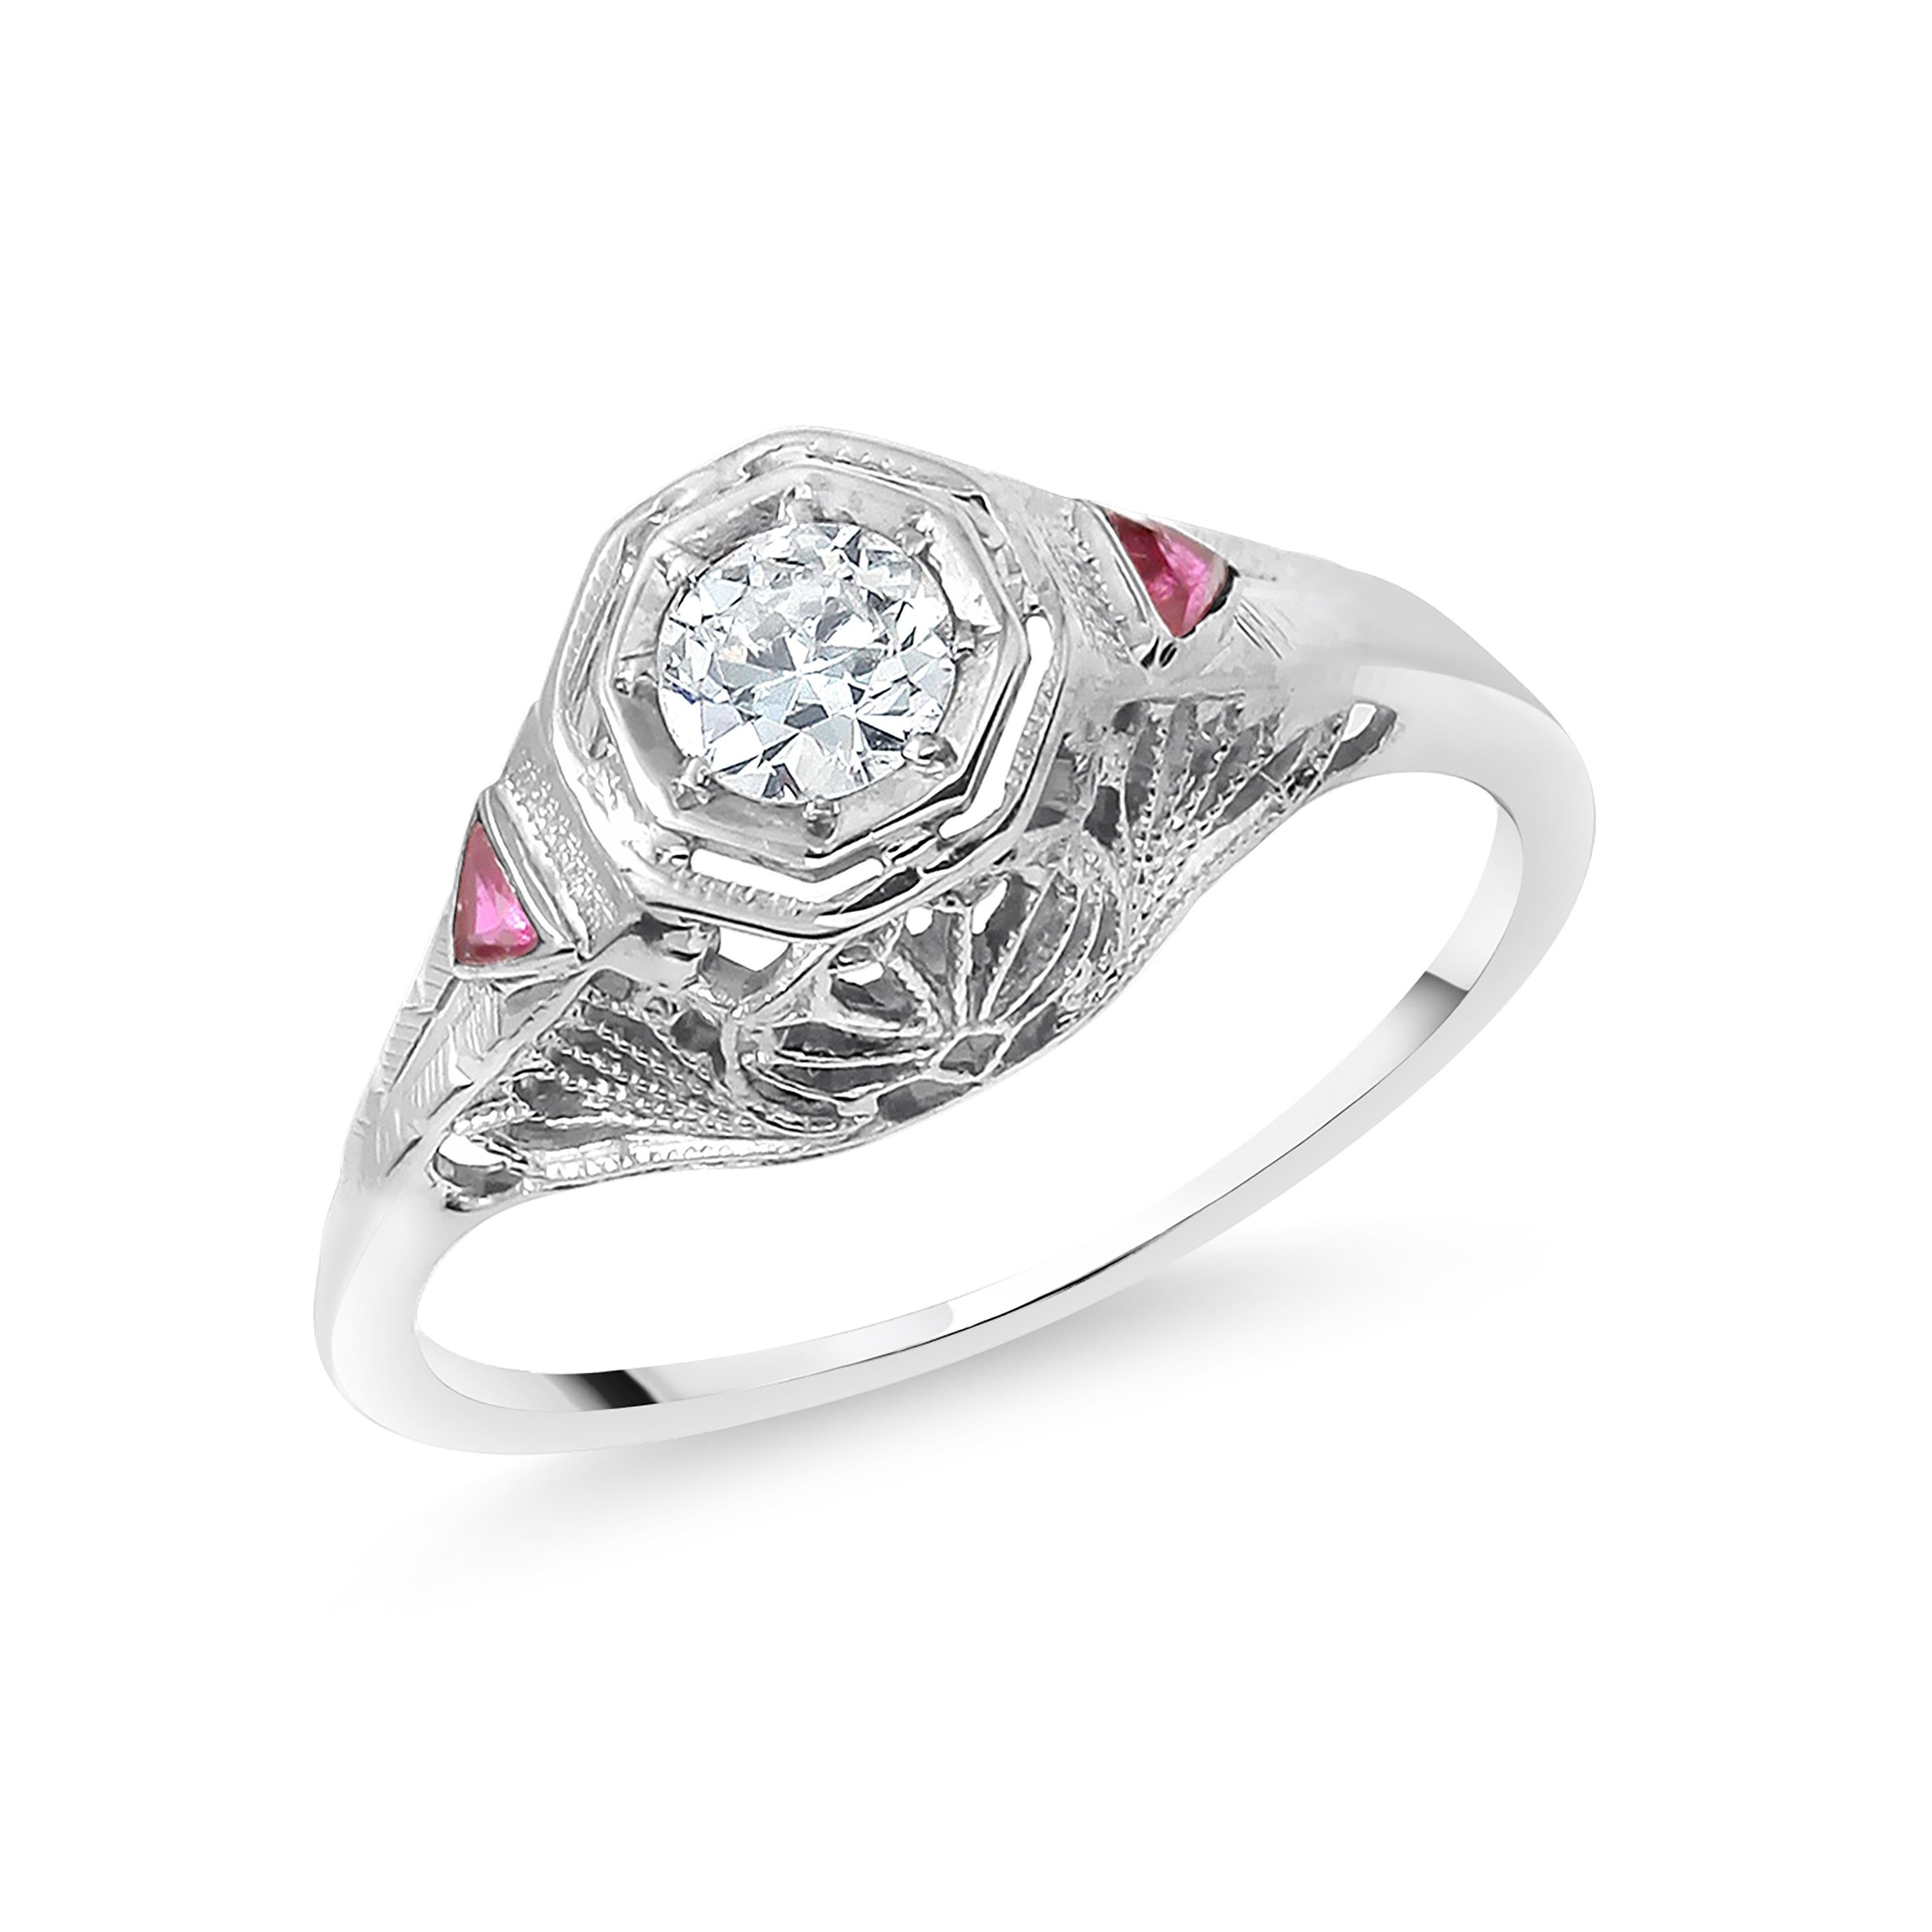 Women's Art Deco Diamond and Ruby White Gold Engagement Ring